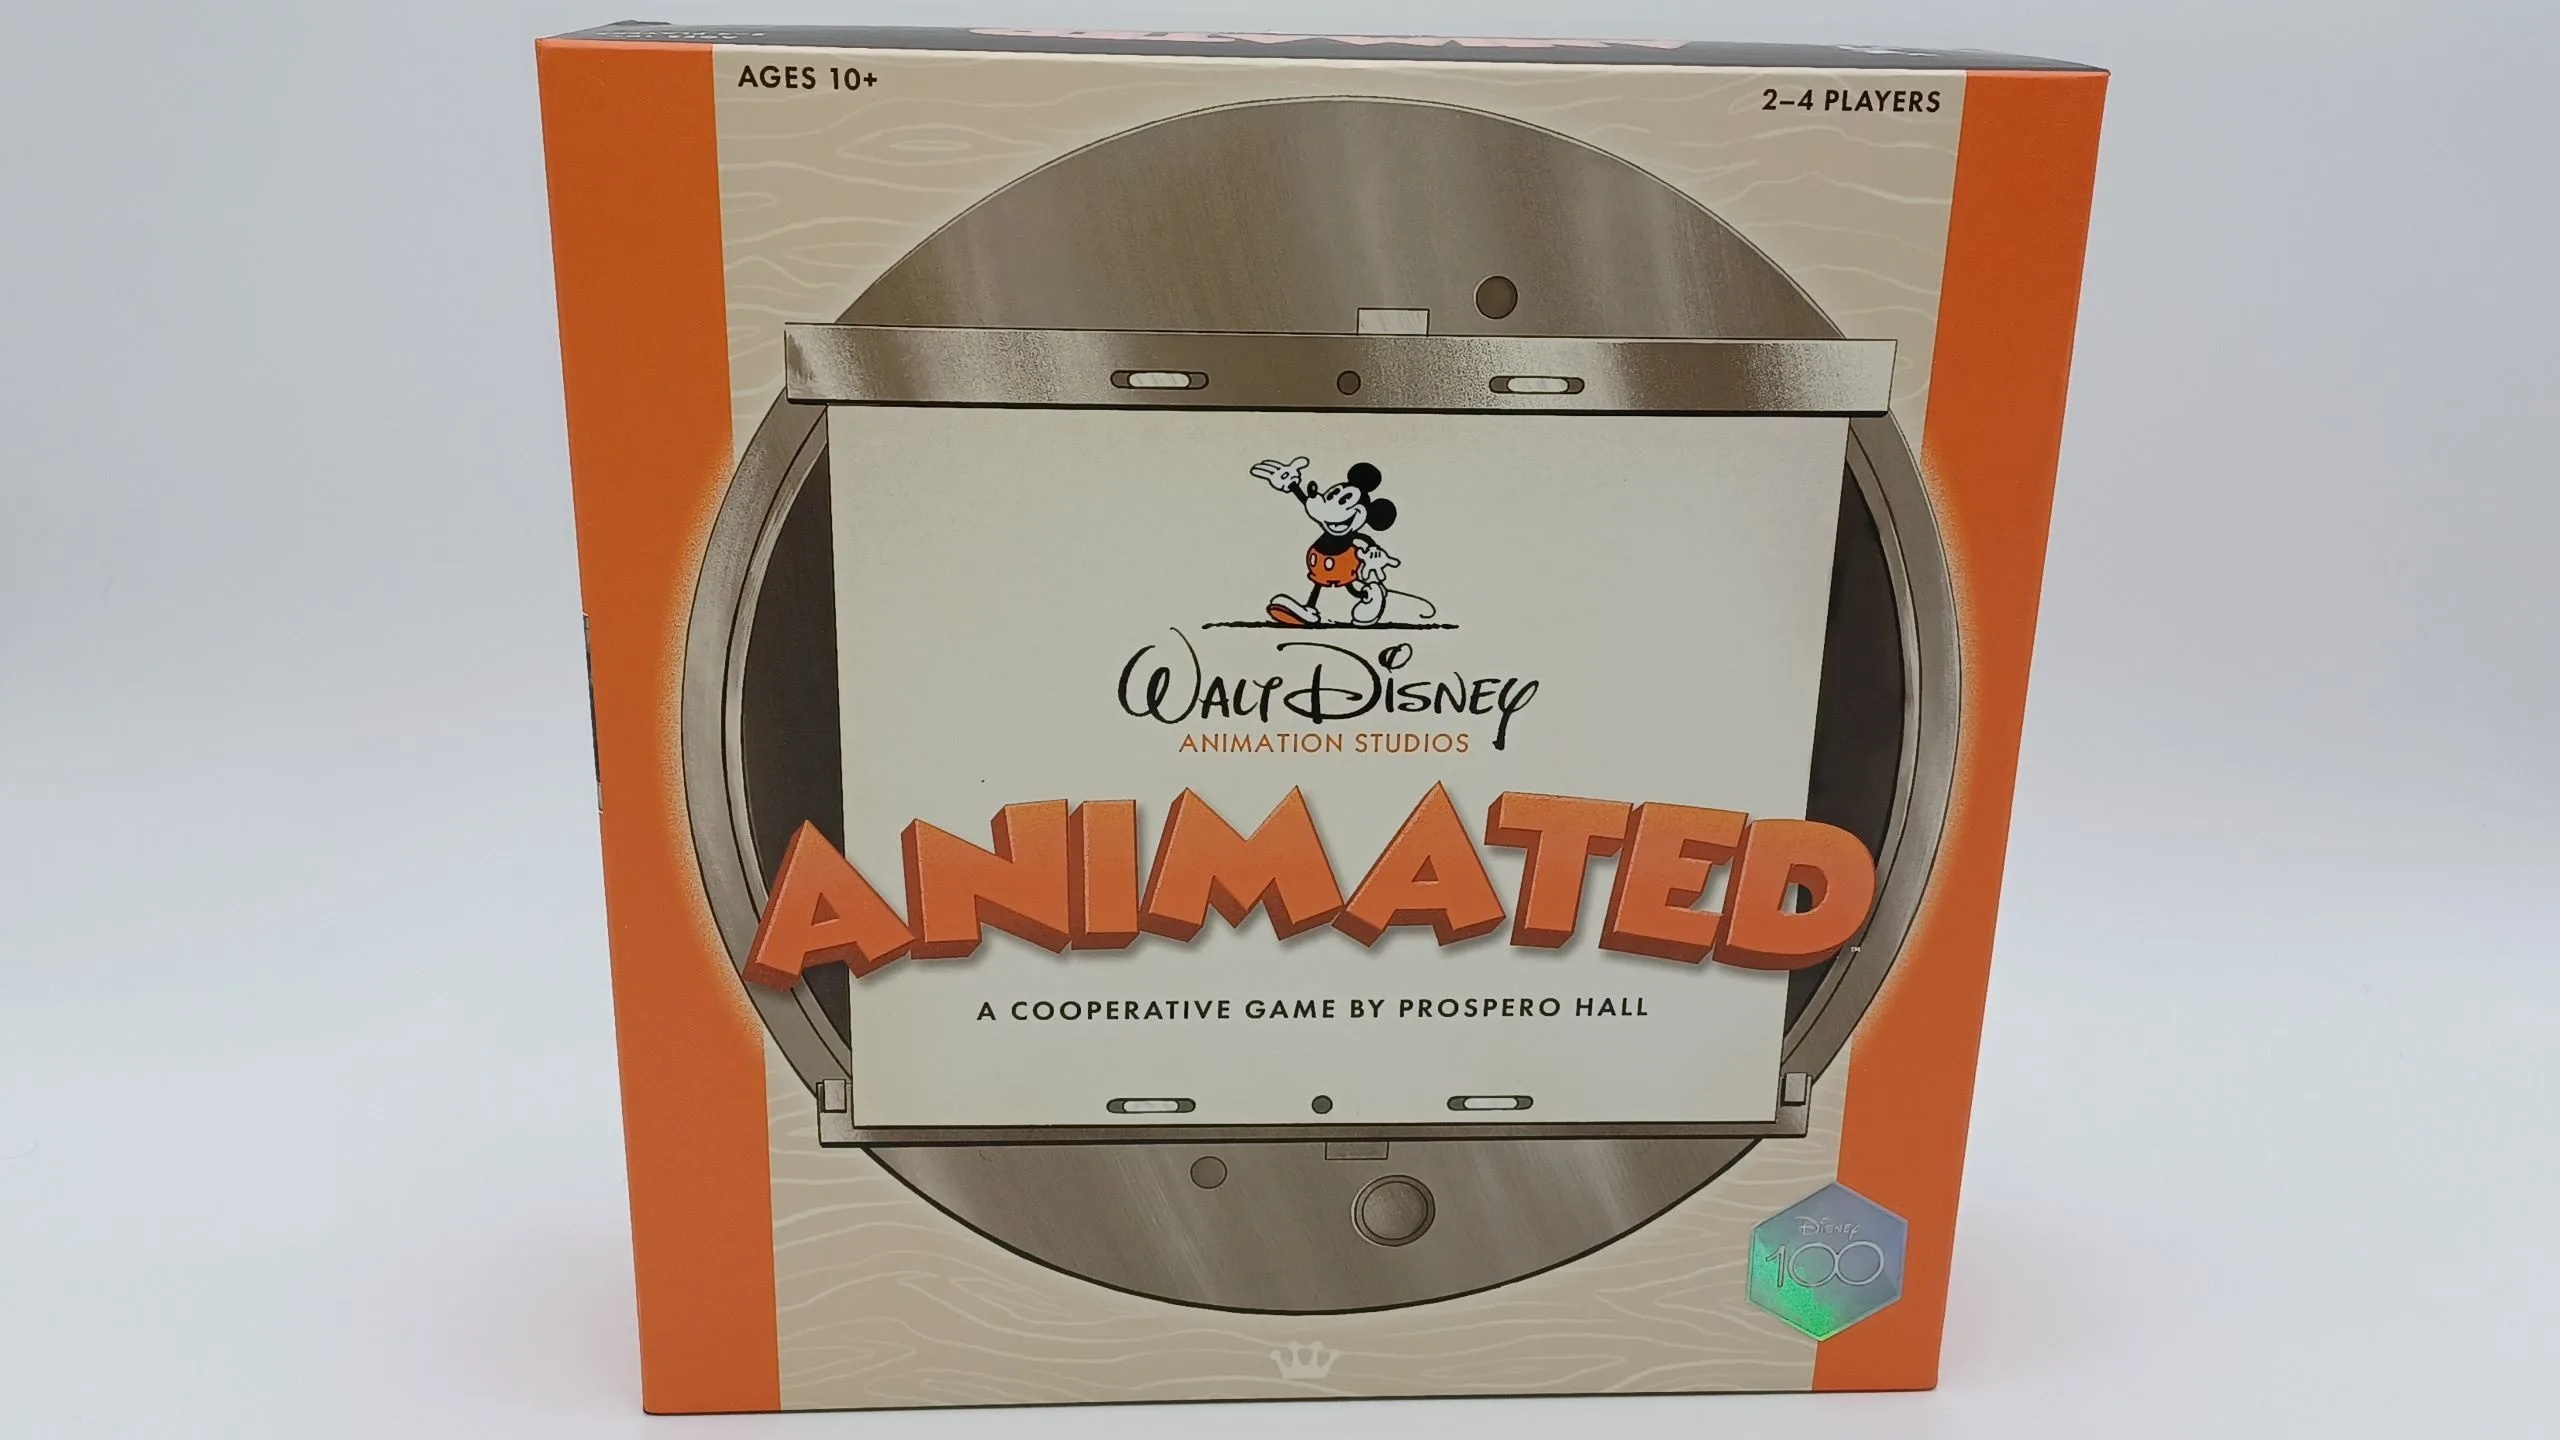 Box for Disney Animated Game